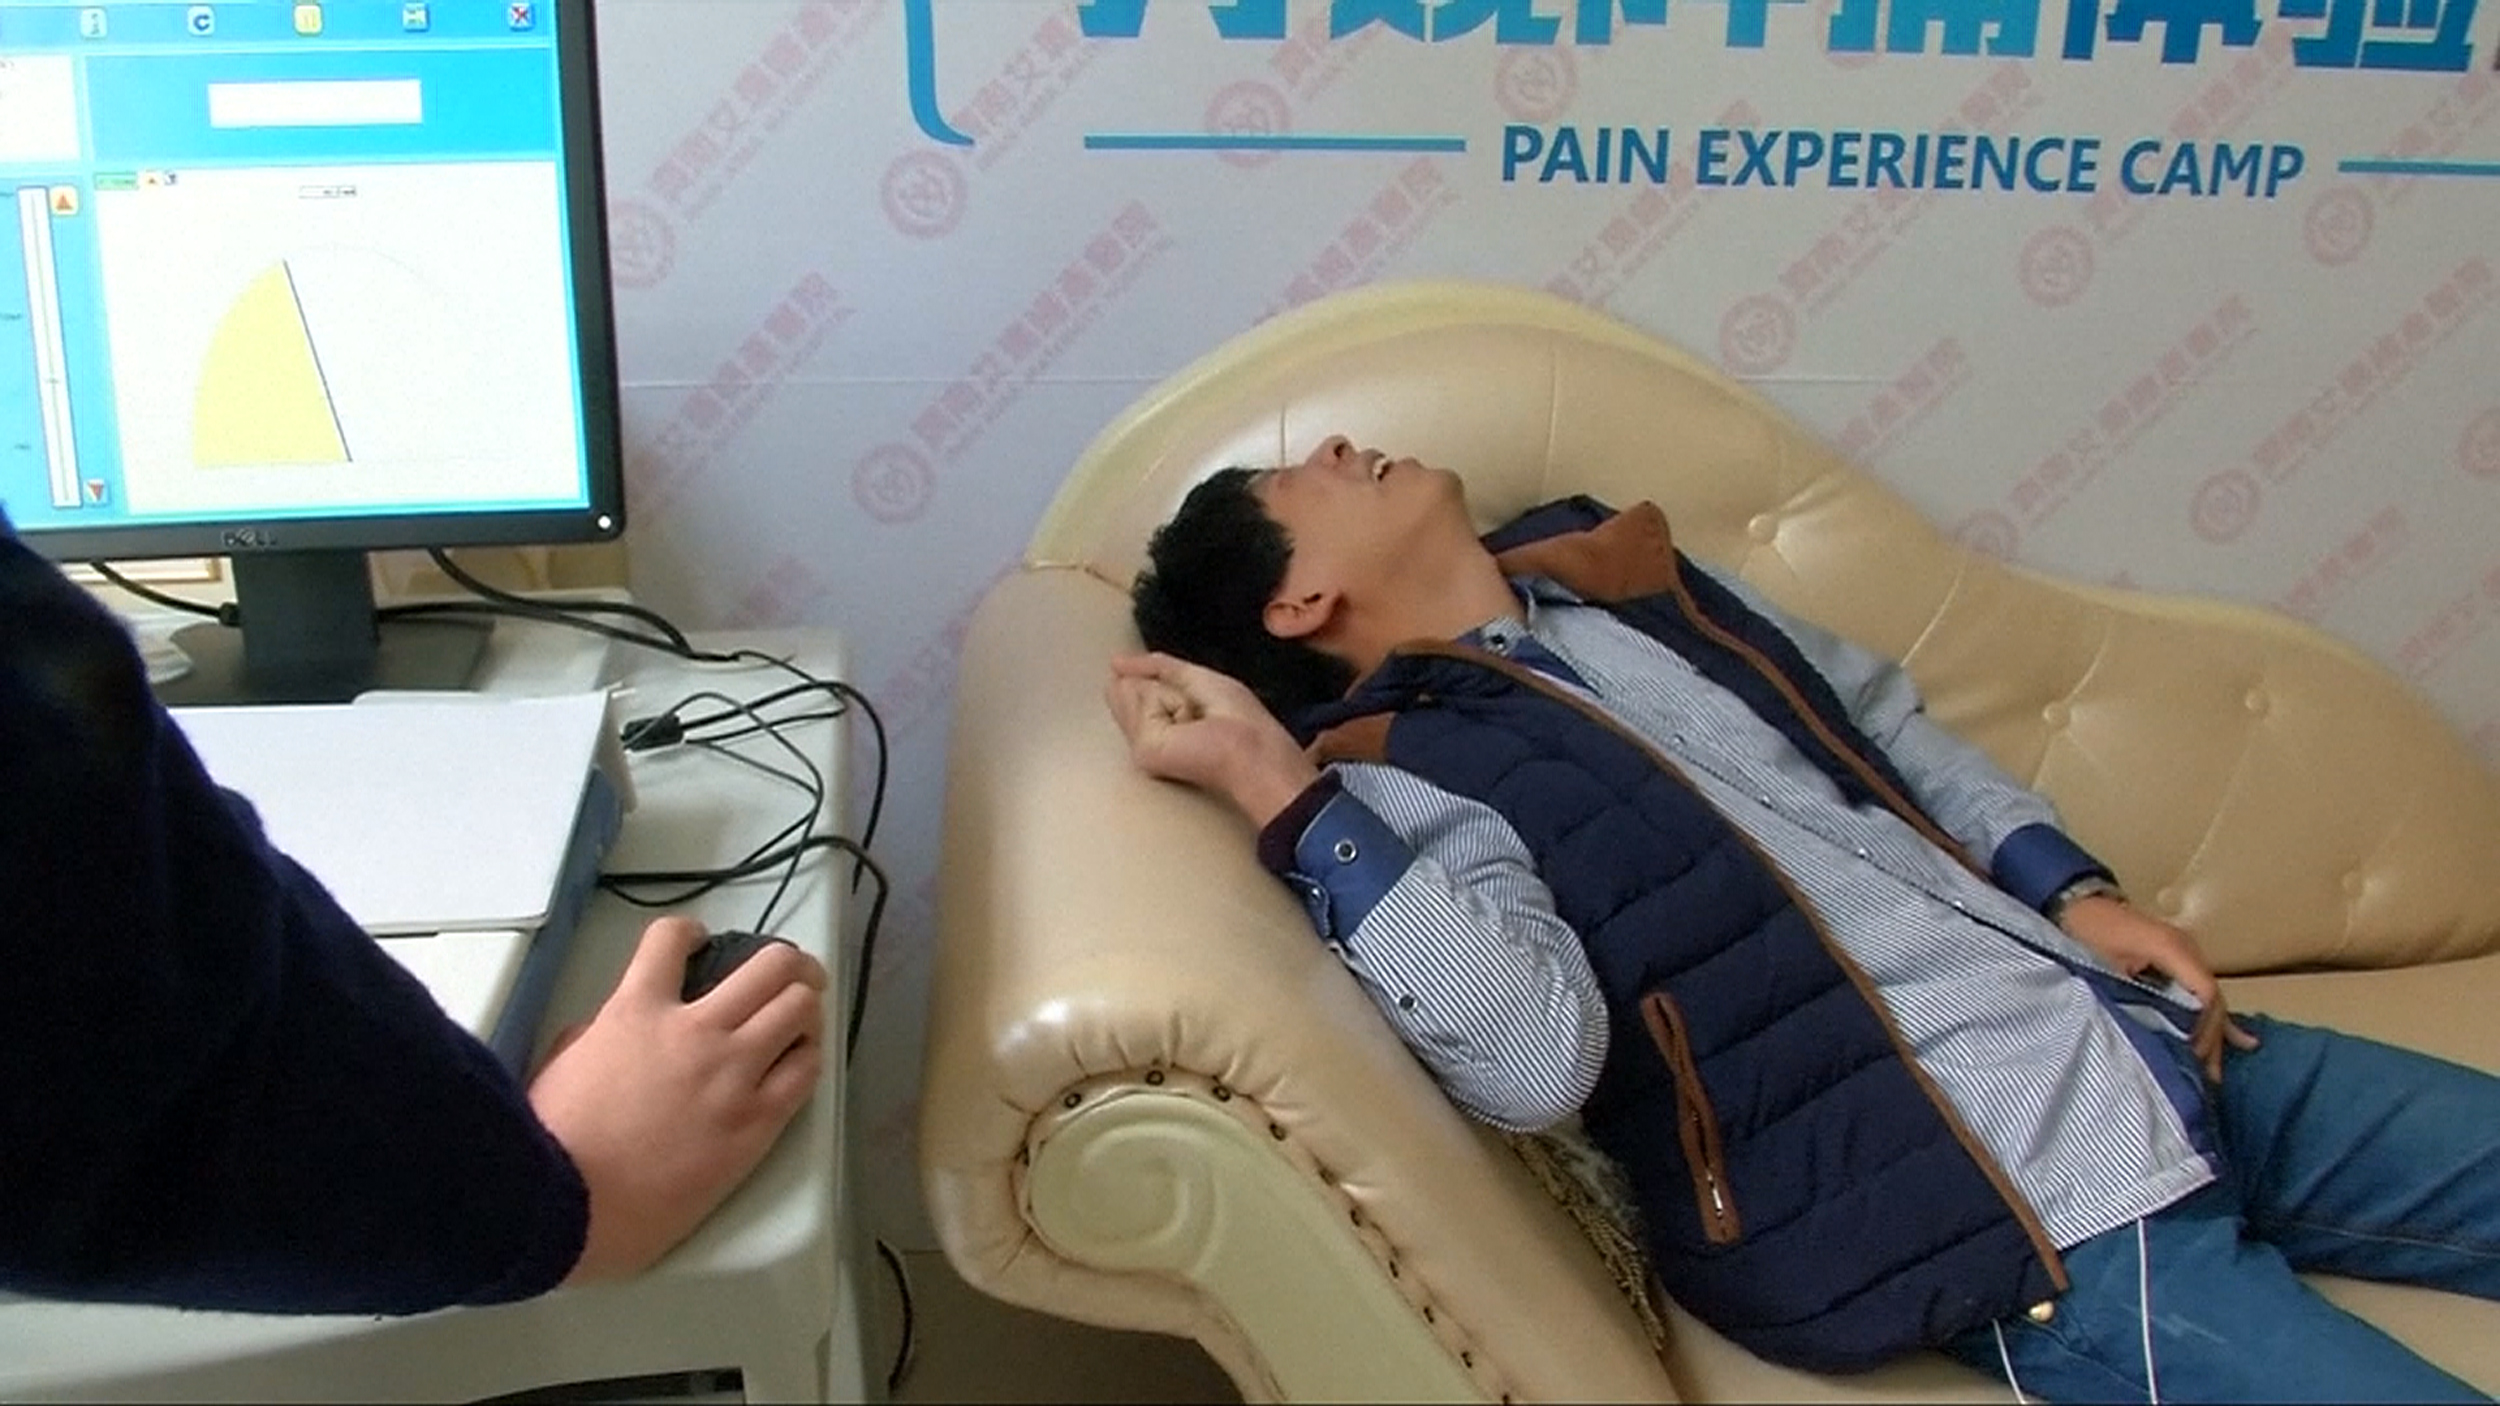 Feel your pain: Video shows men using 'labor pain simulator